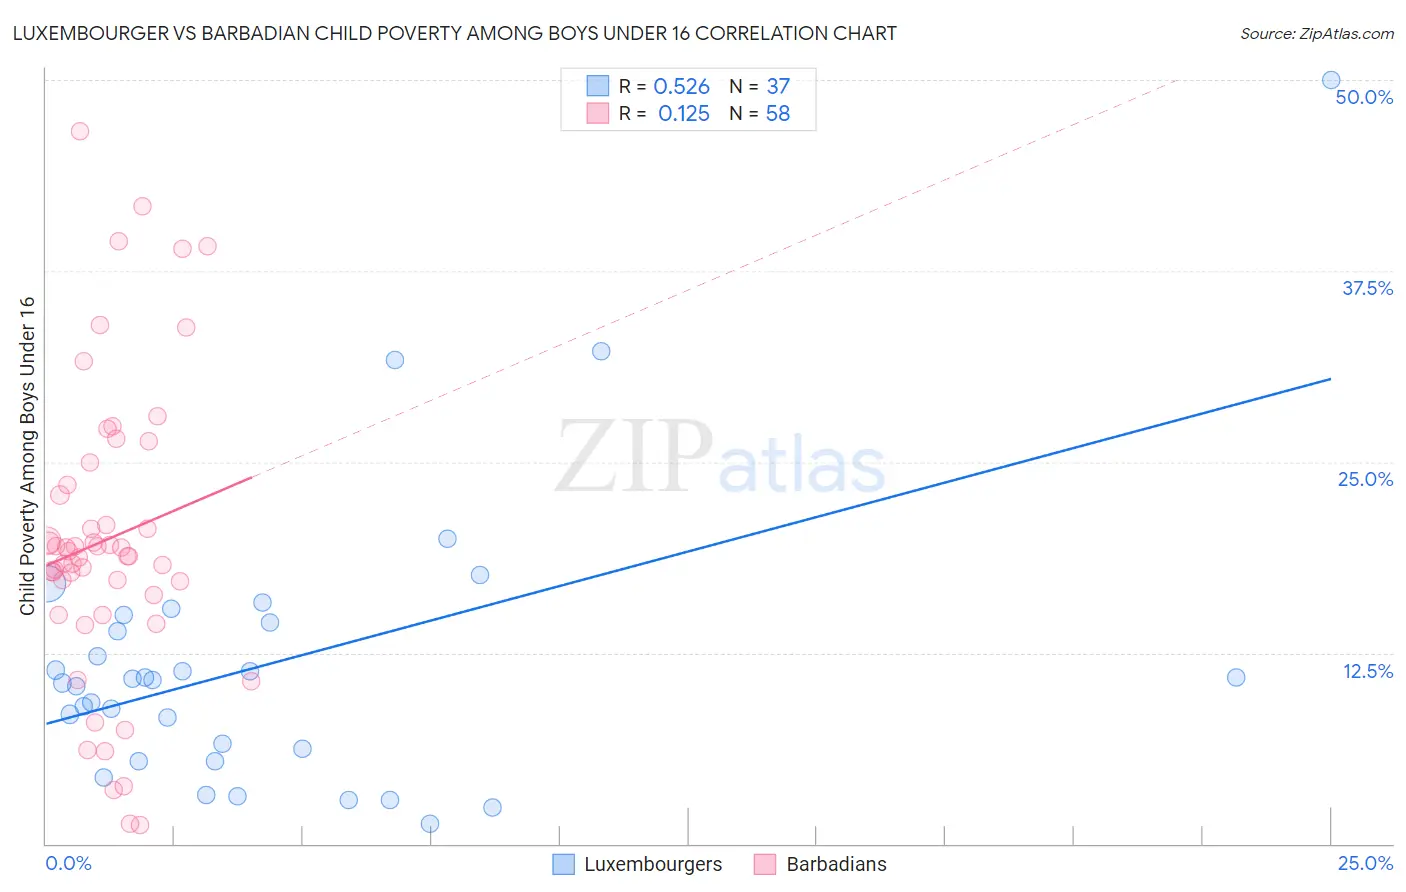 Luxembourger vs Barbadian Child Poverty Among Boys Under 16